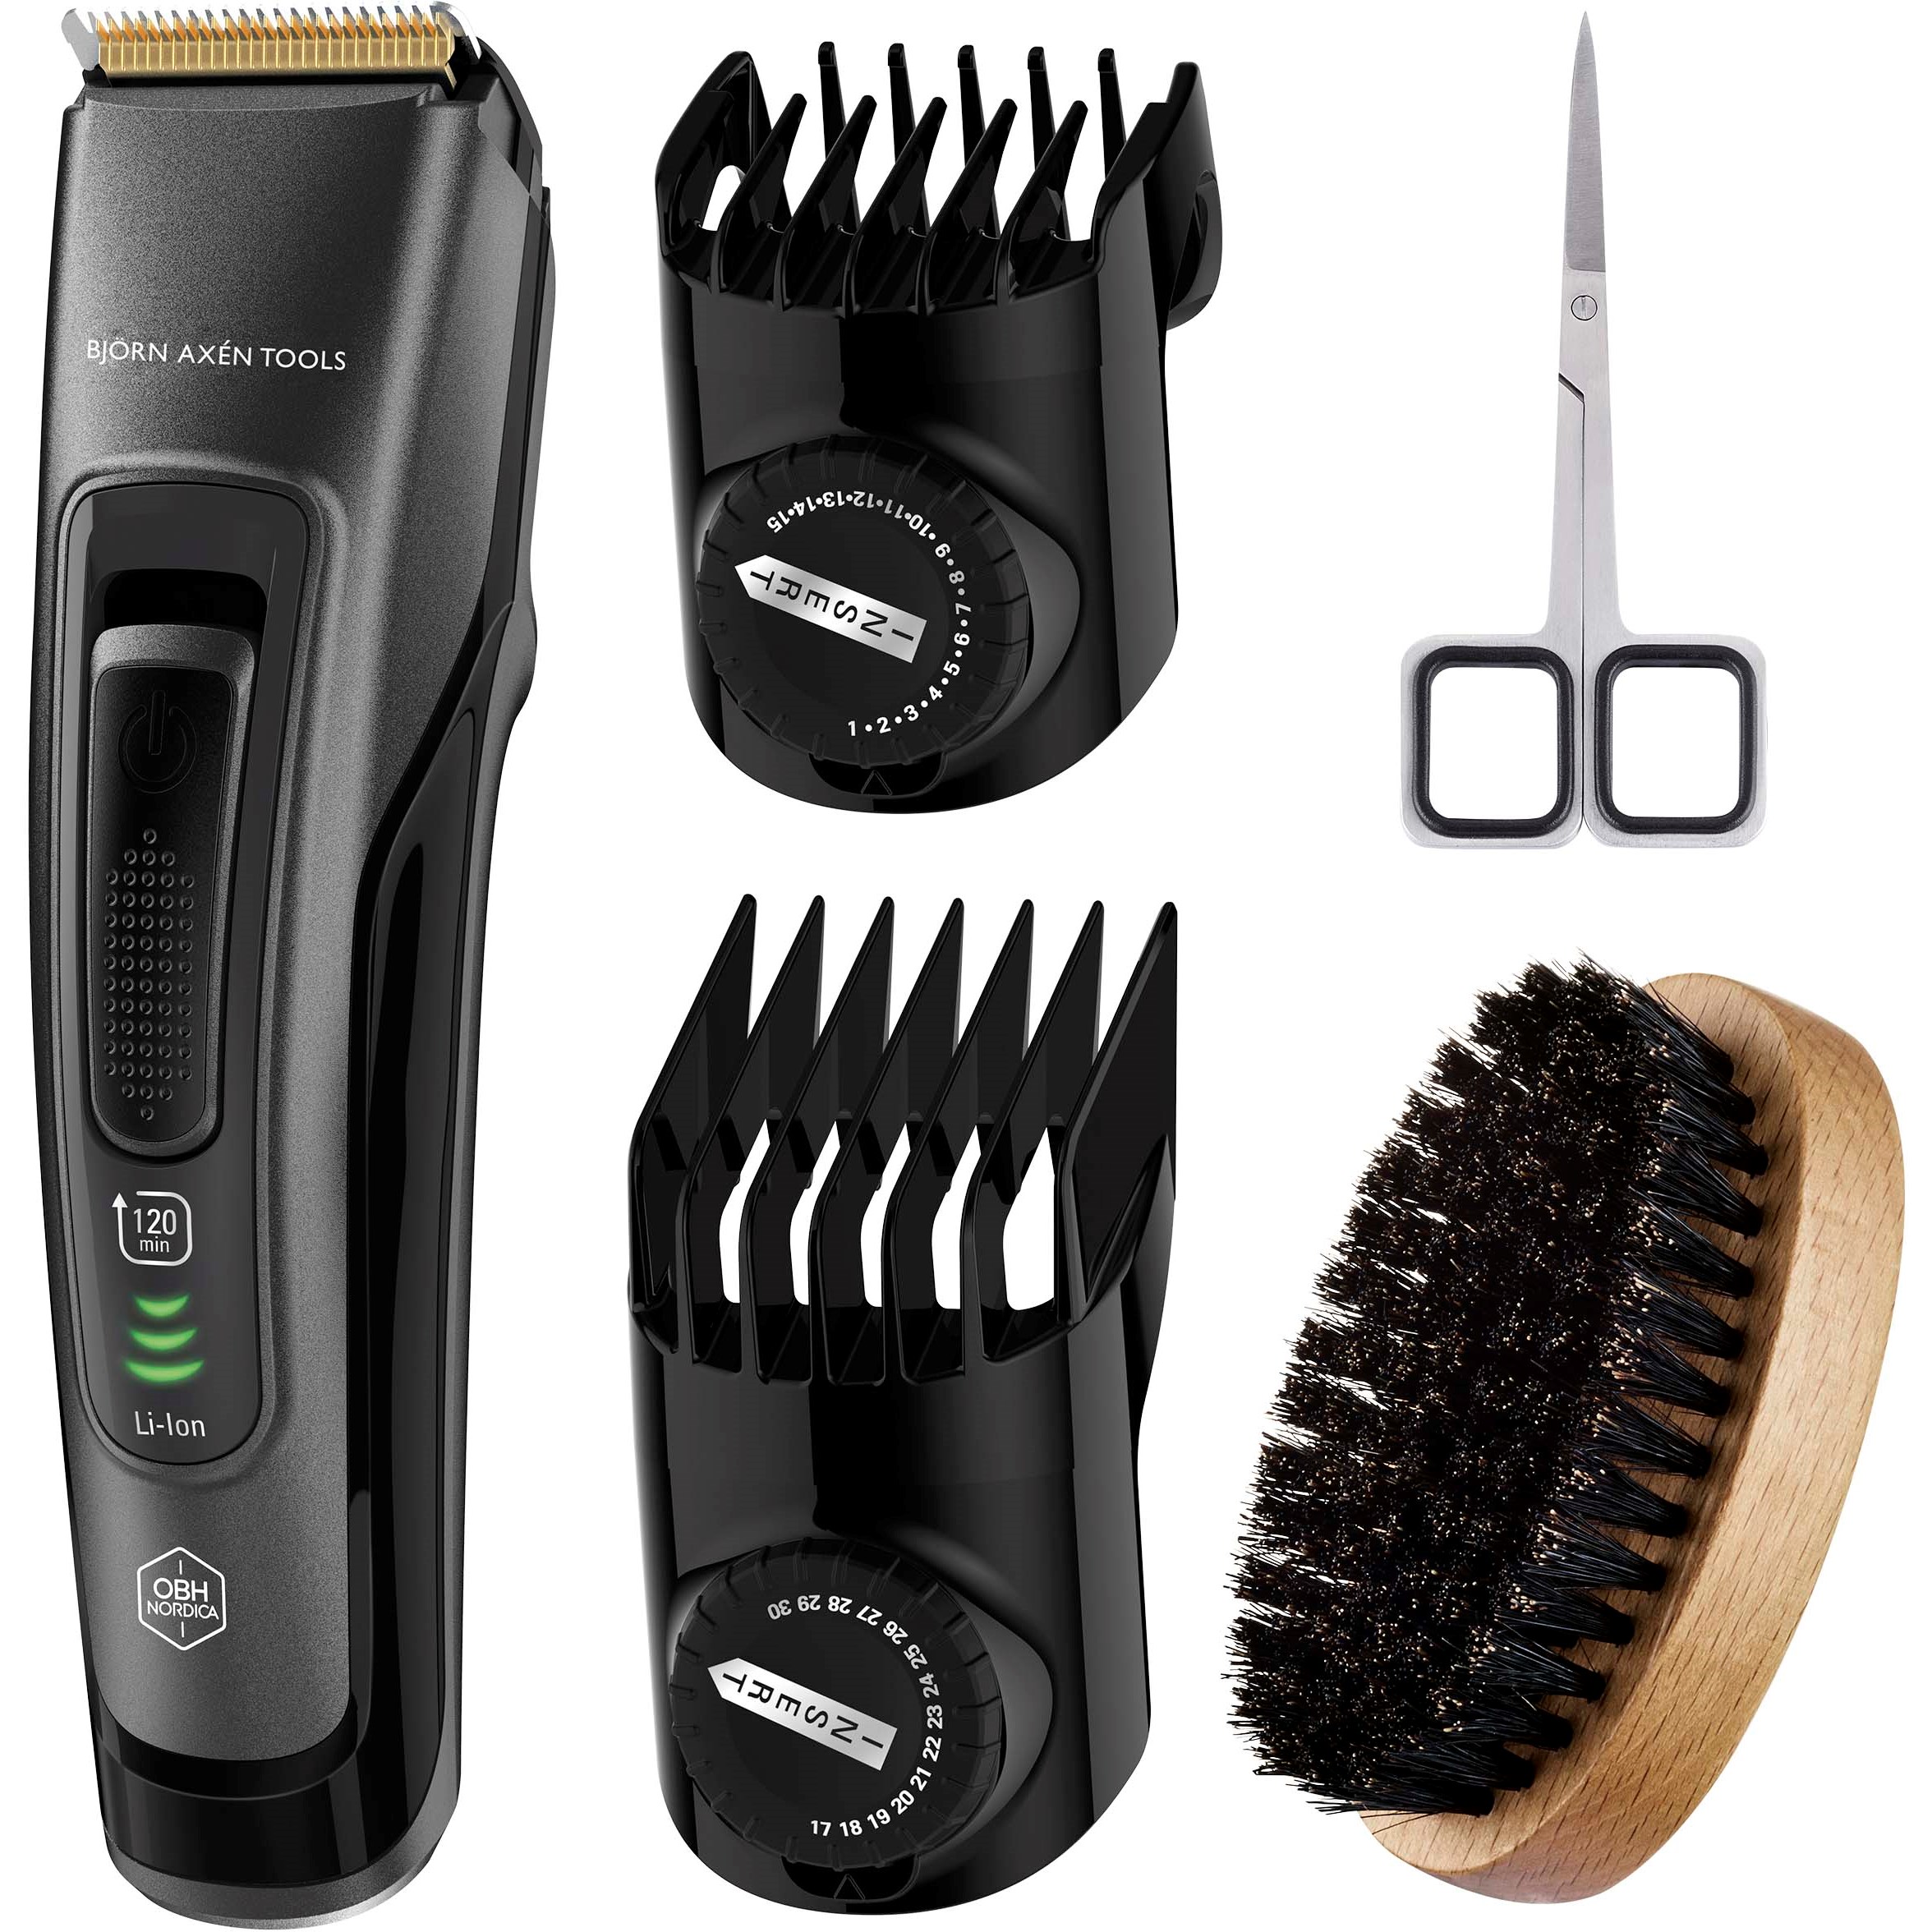 OBH Nordica Björn Axen Tools Beard And Hair Trimming Kit